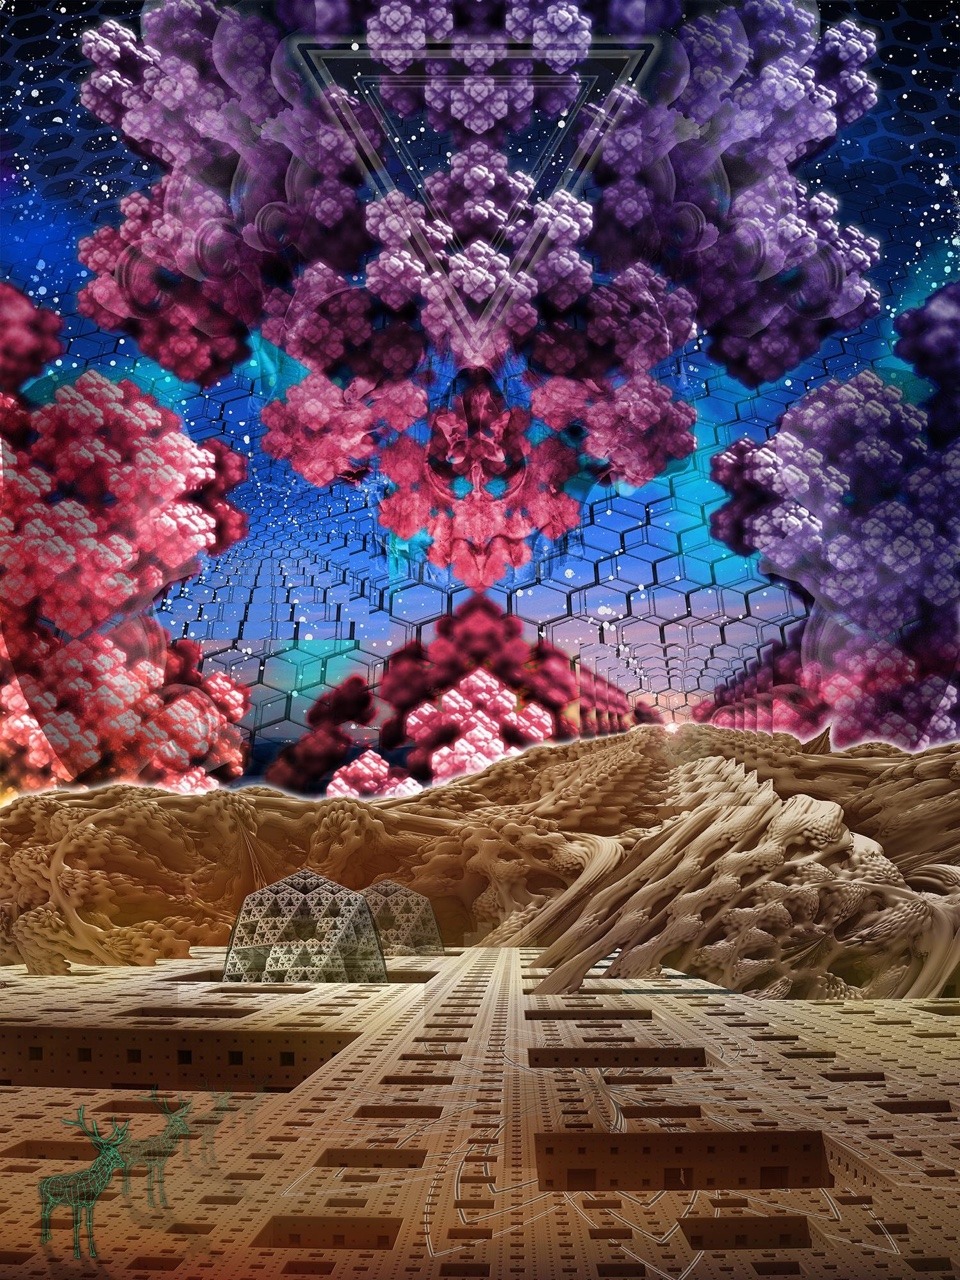 Incredible dreamscape with fractals of trippy, colorful patterns 